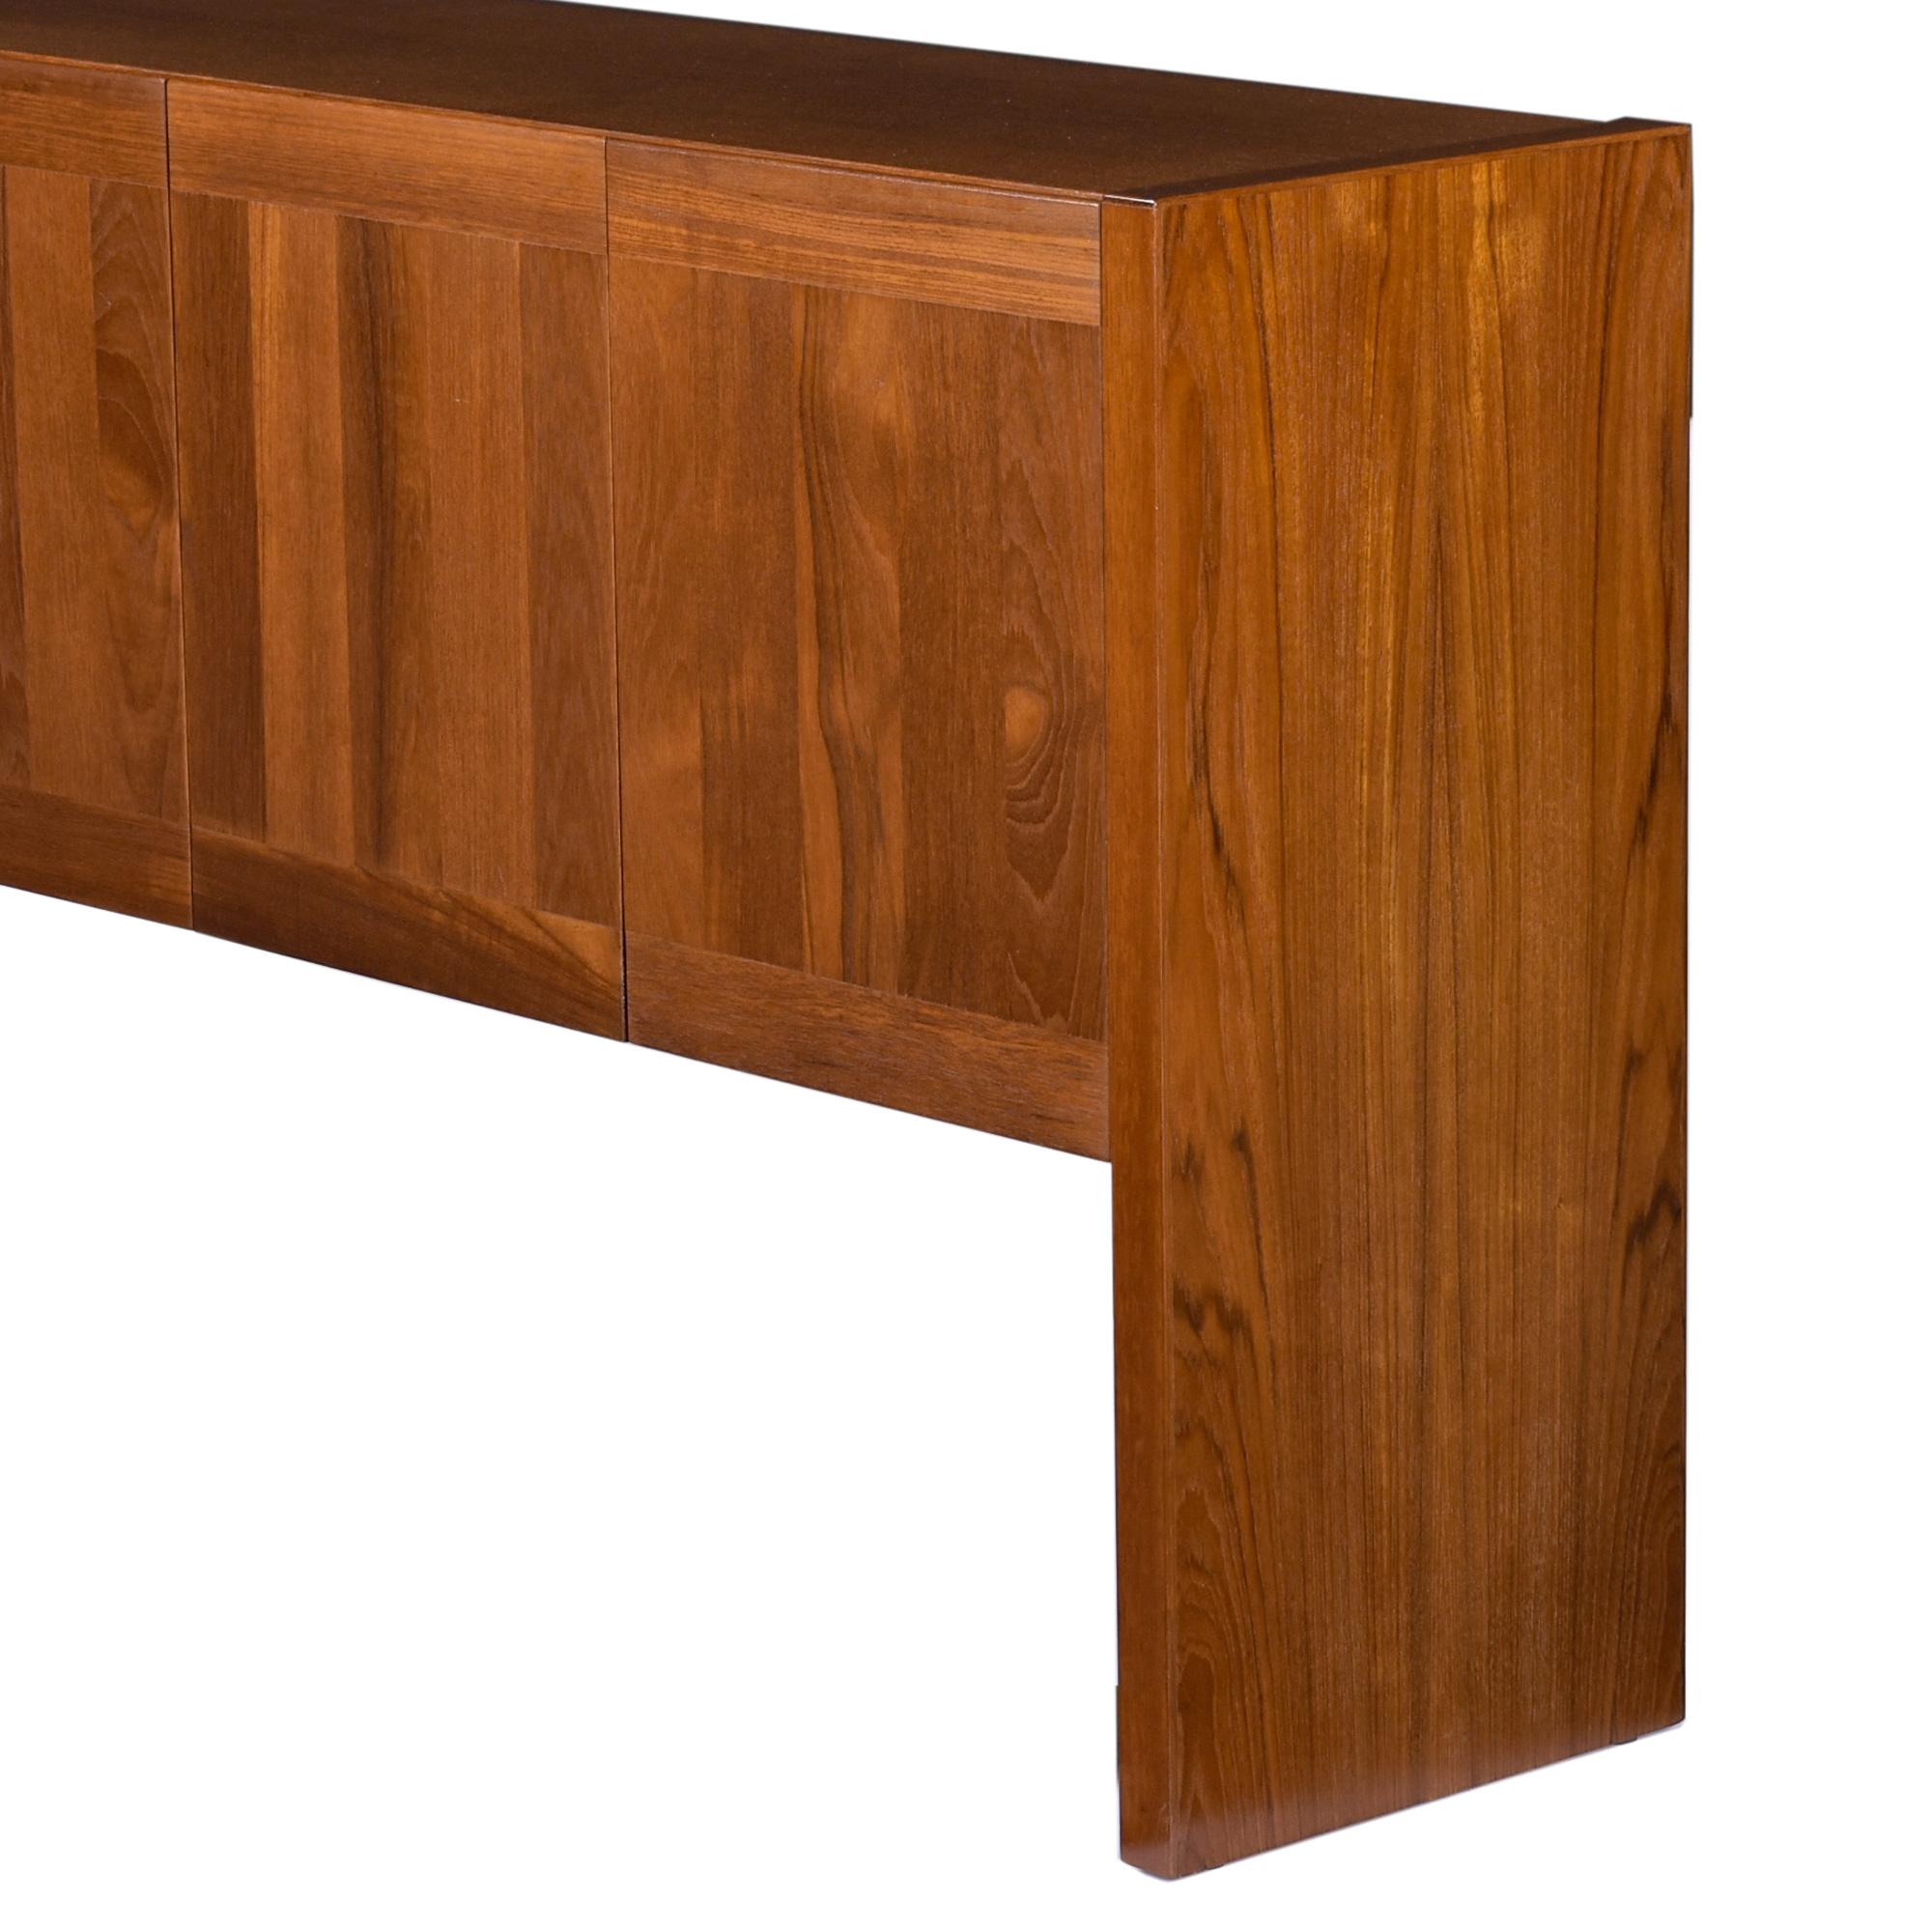 Danish Teak Credenza Media Cabinet by Dyrlund In Good Condition For Sale In Chattanooga, TN